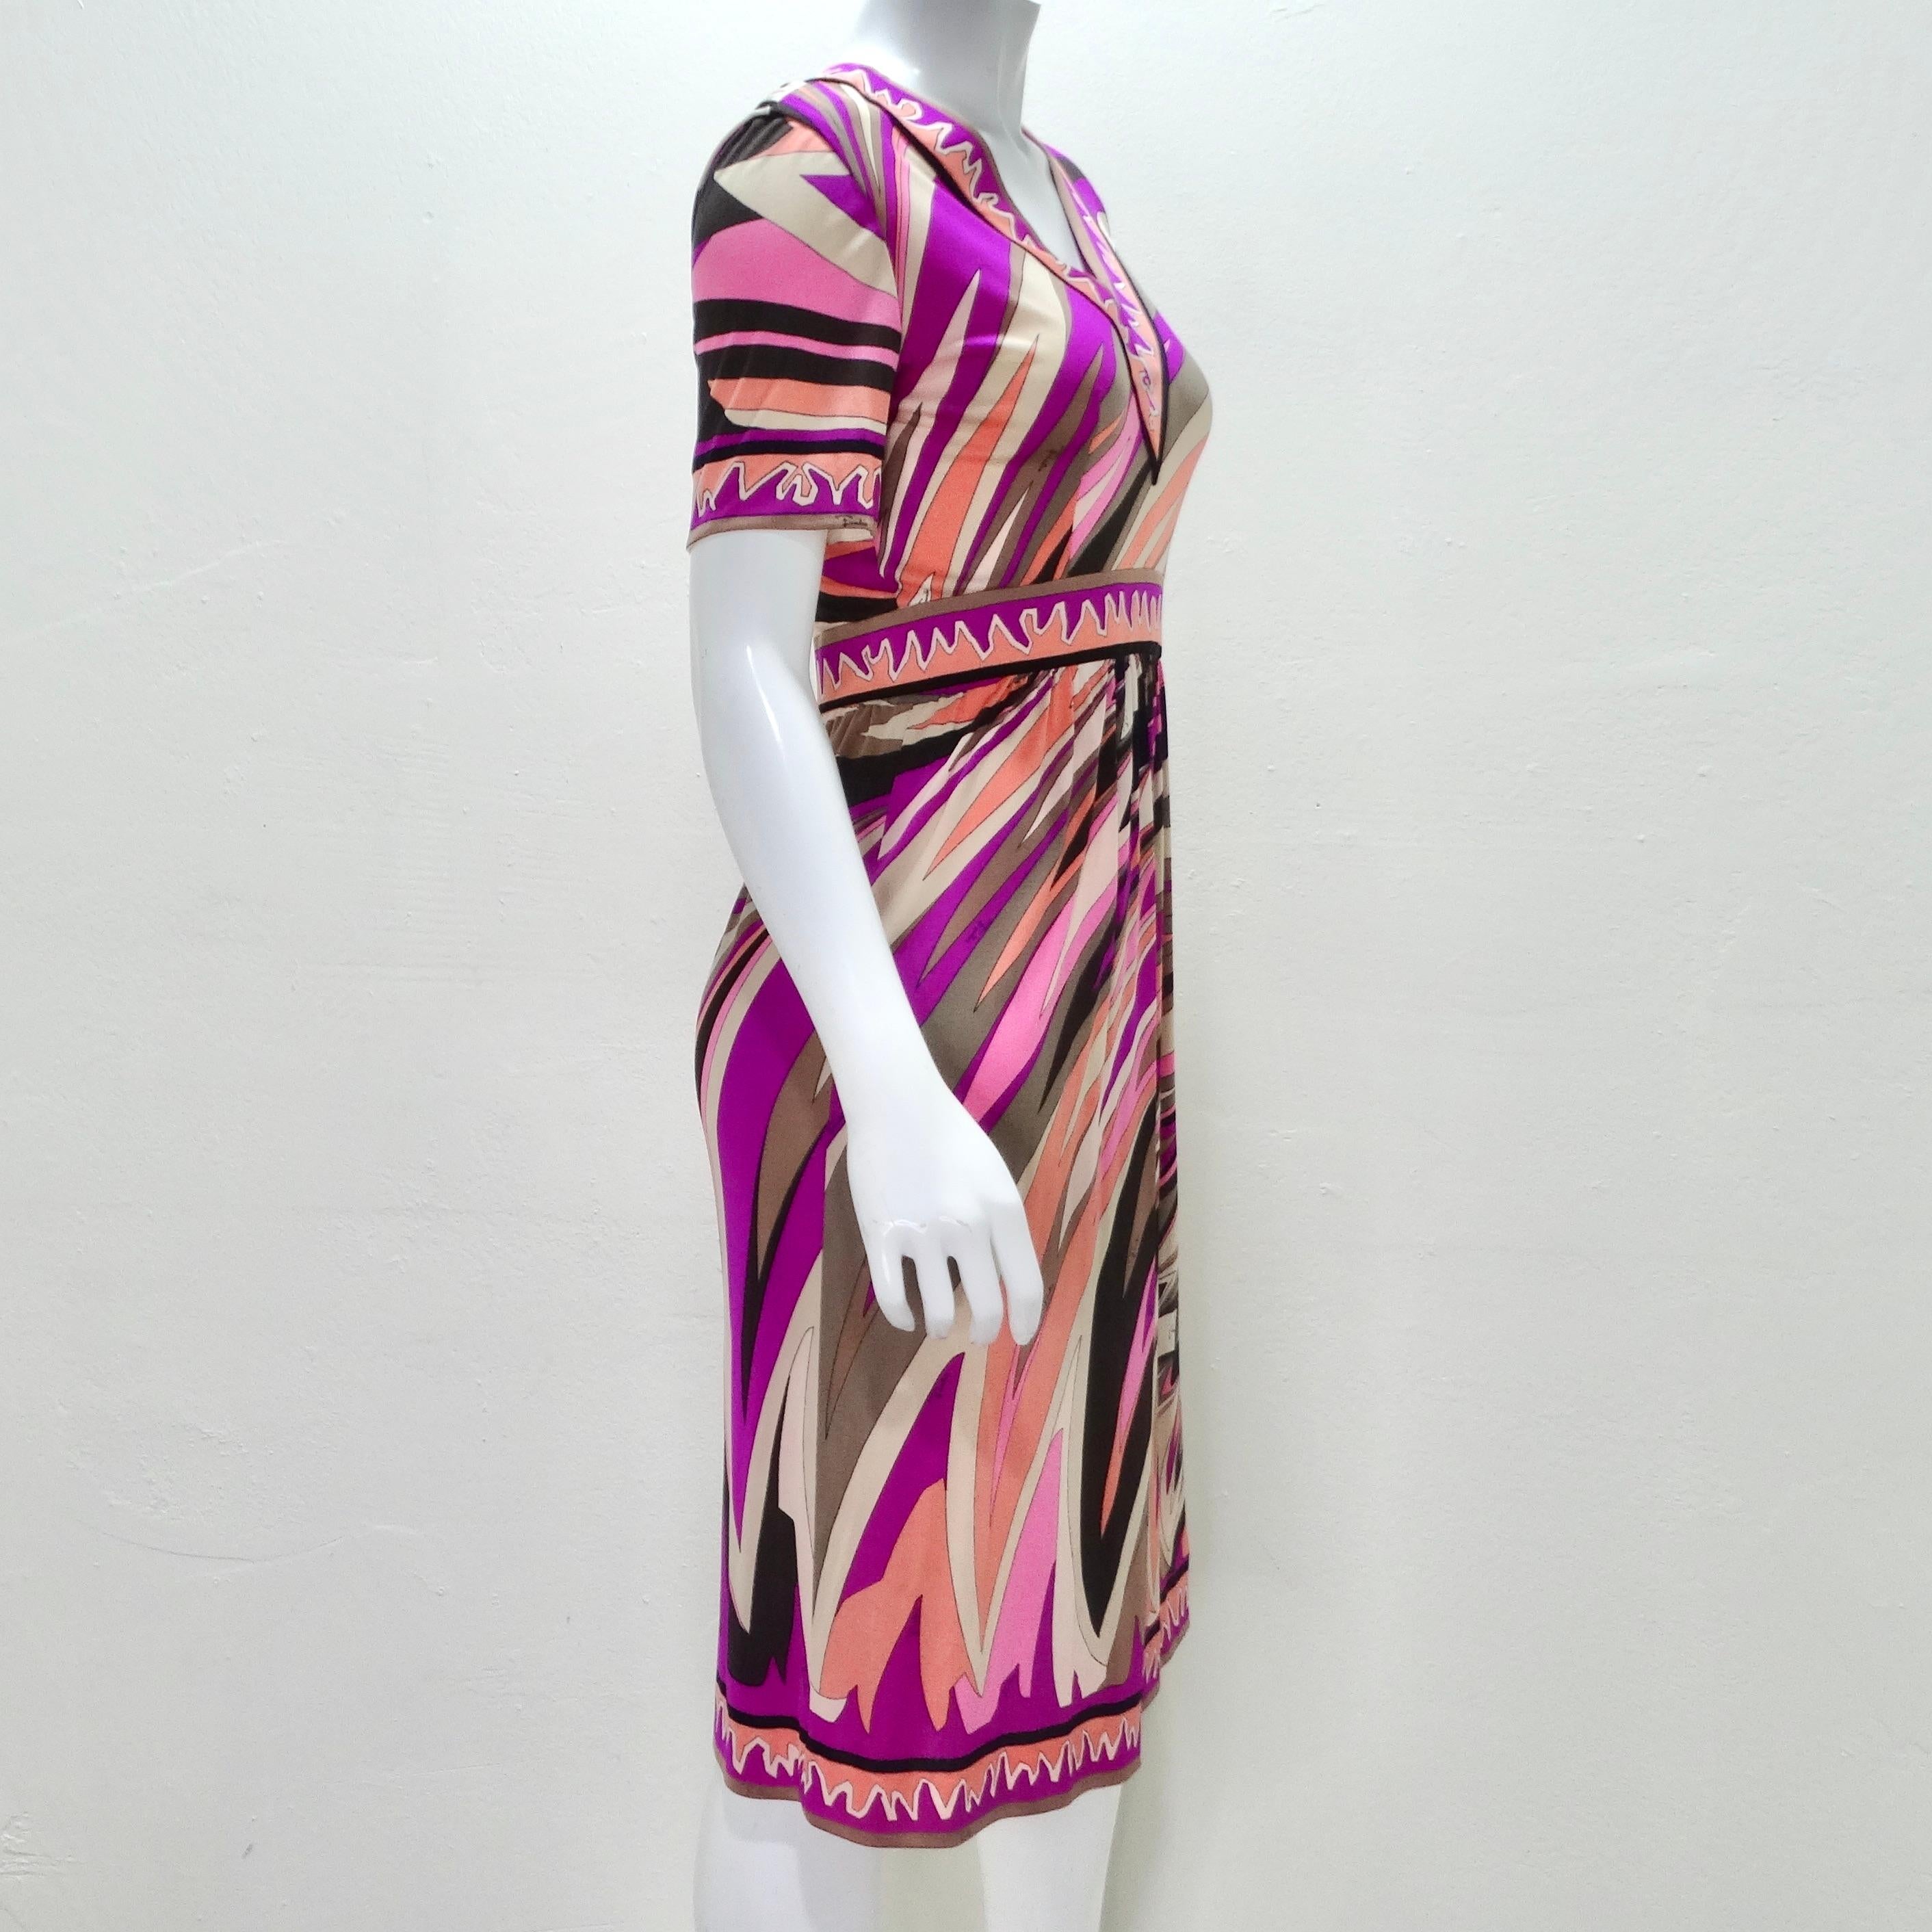 Pucci 1960s Printed Multicolor Dress In Good Condition For Sale In Scottsdale, AZ